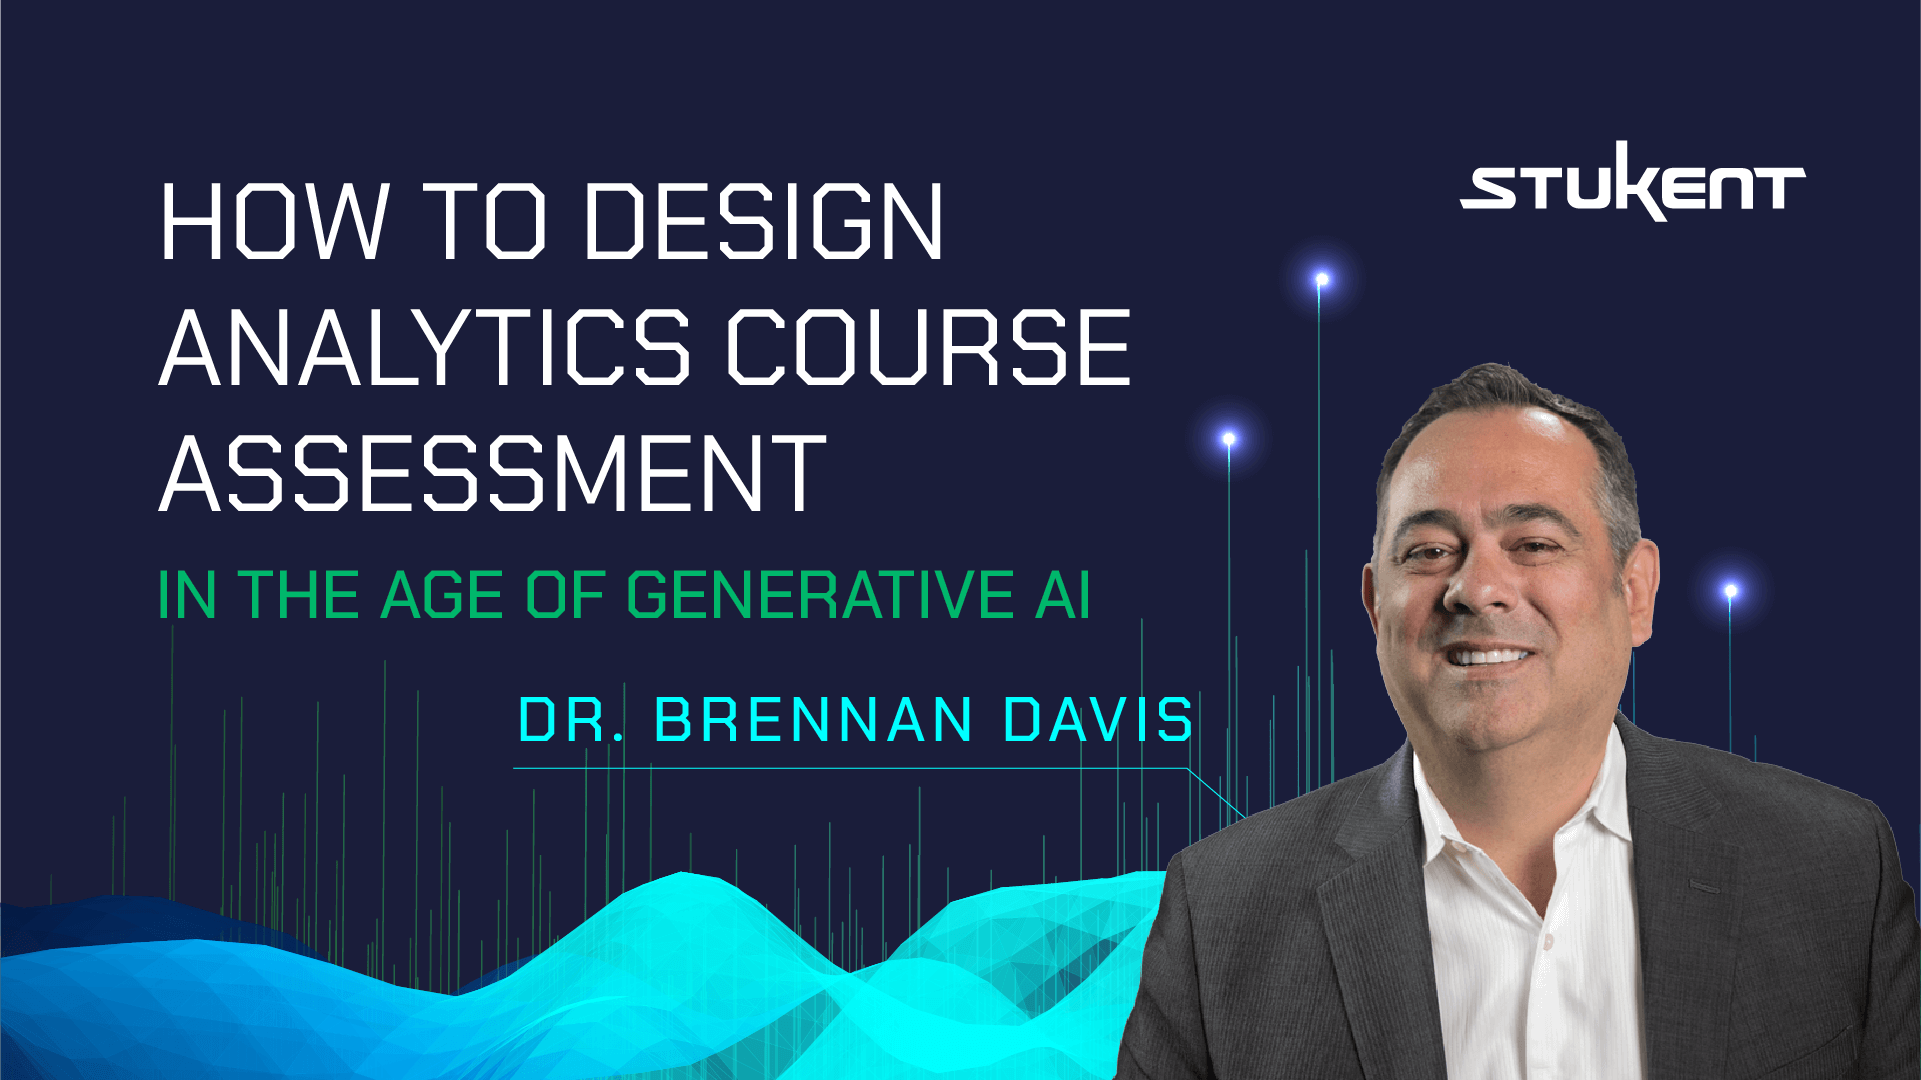 How to Design an Analytics Course Assessment in the Age of Generative AI